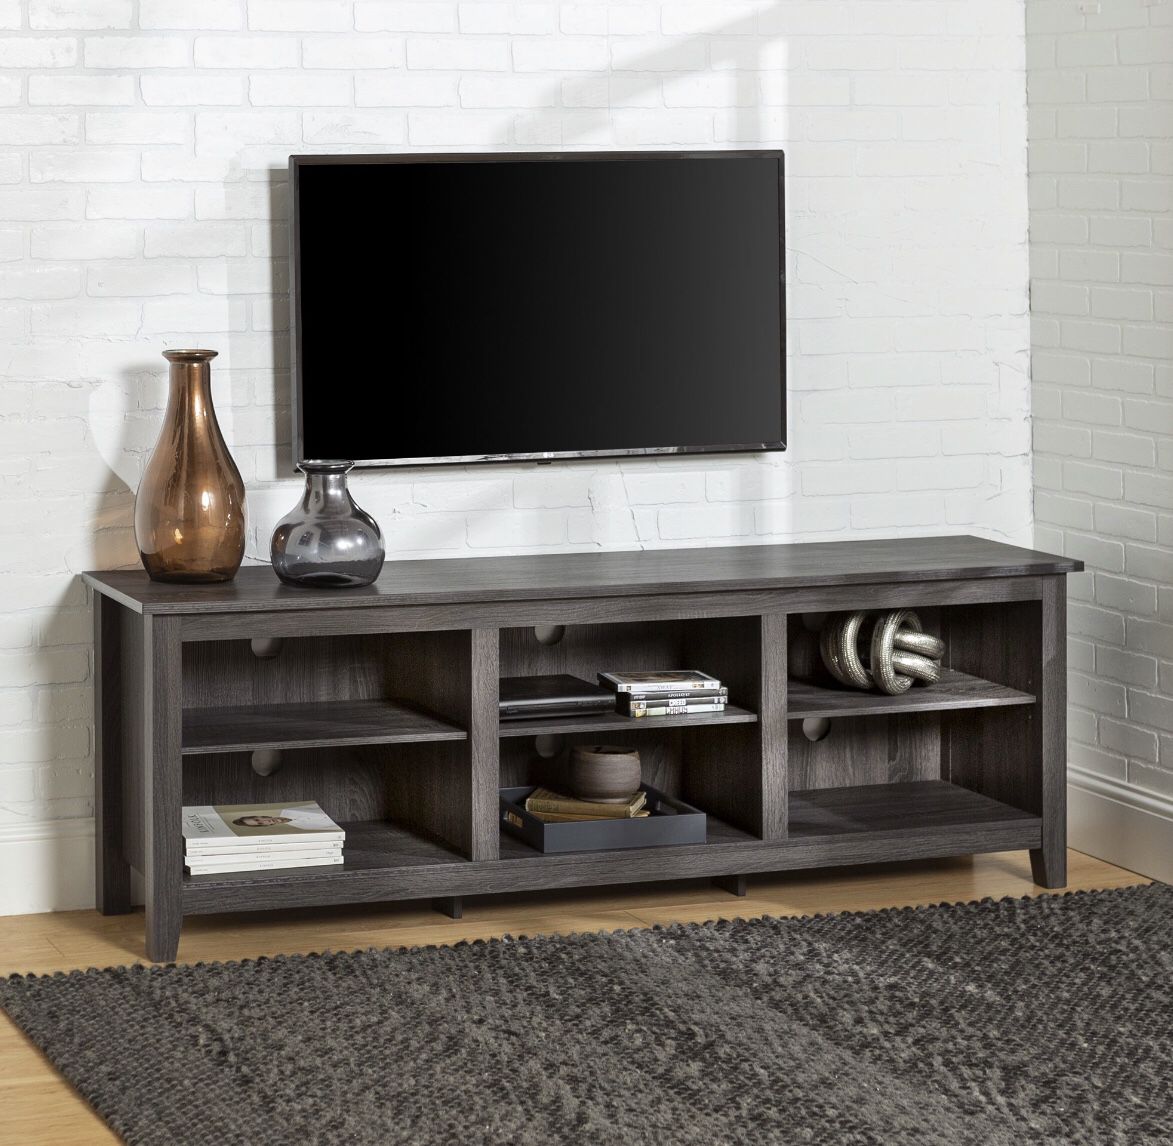 Woven Paths Open Storage TV Stand for TVs up to 80", Charcoal